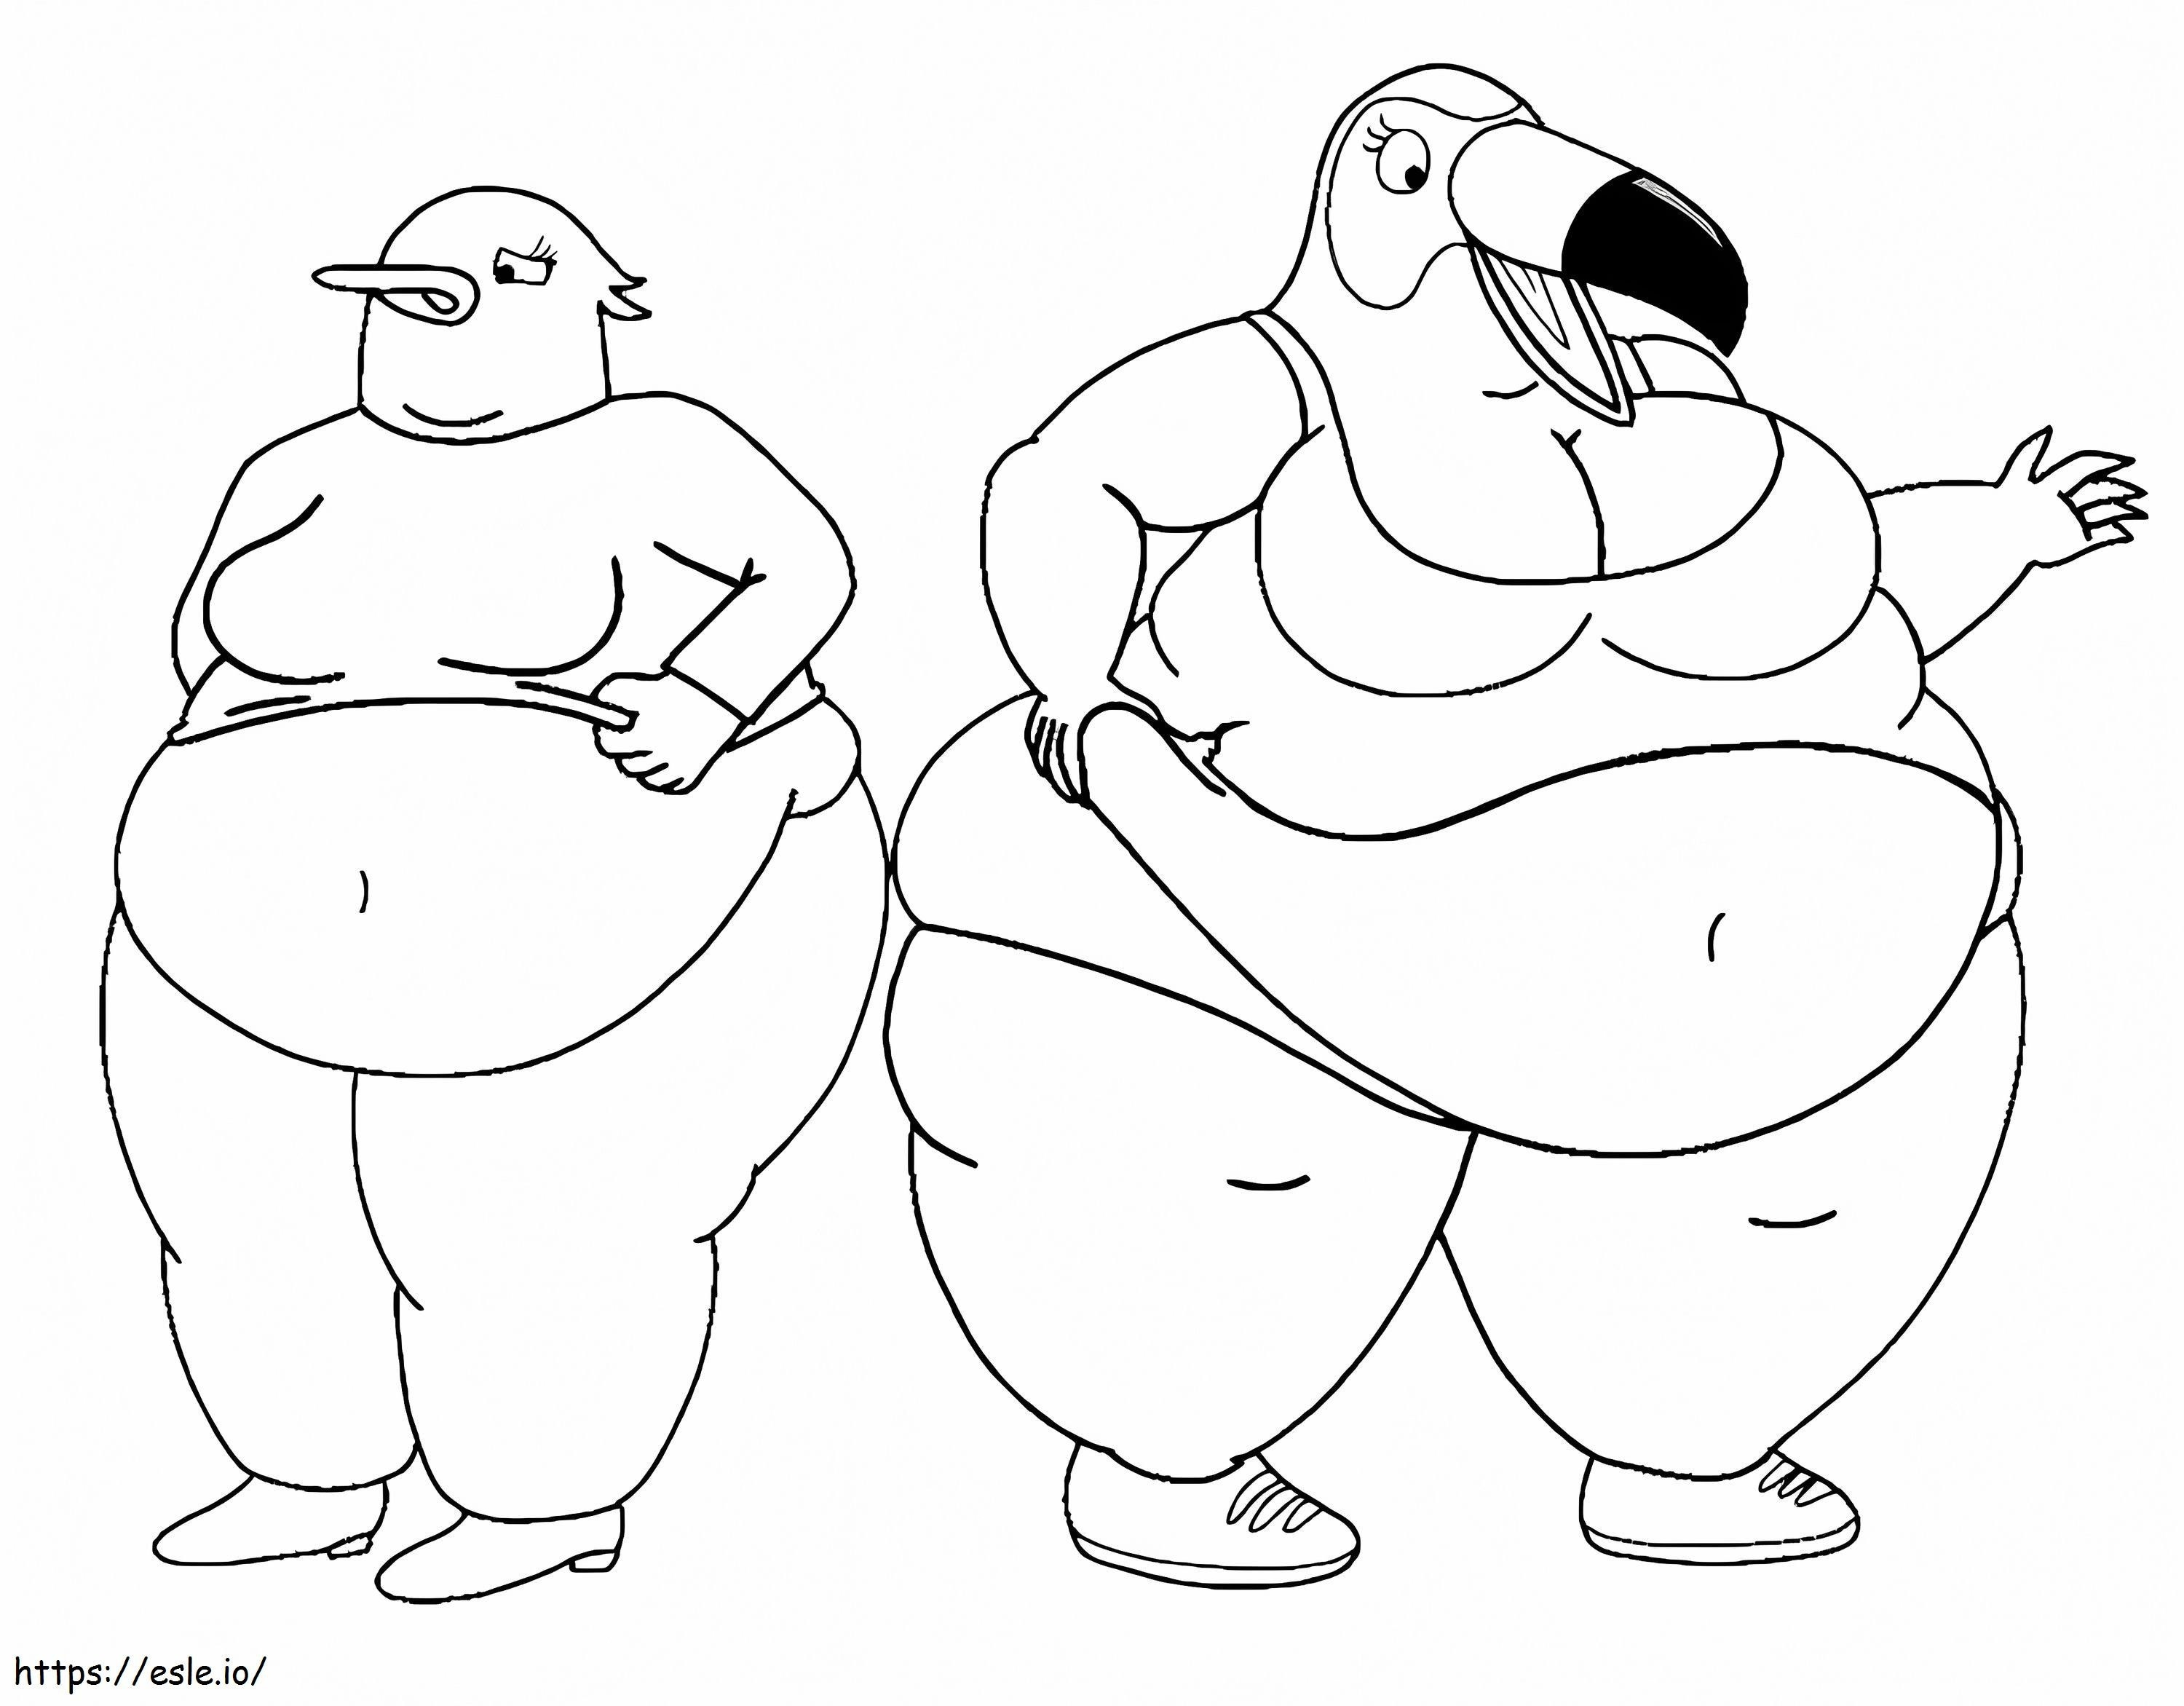 Fat Tuca And Bertie coloring page